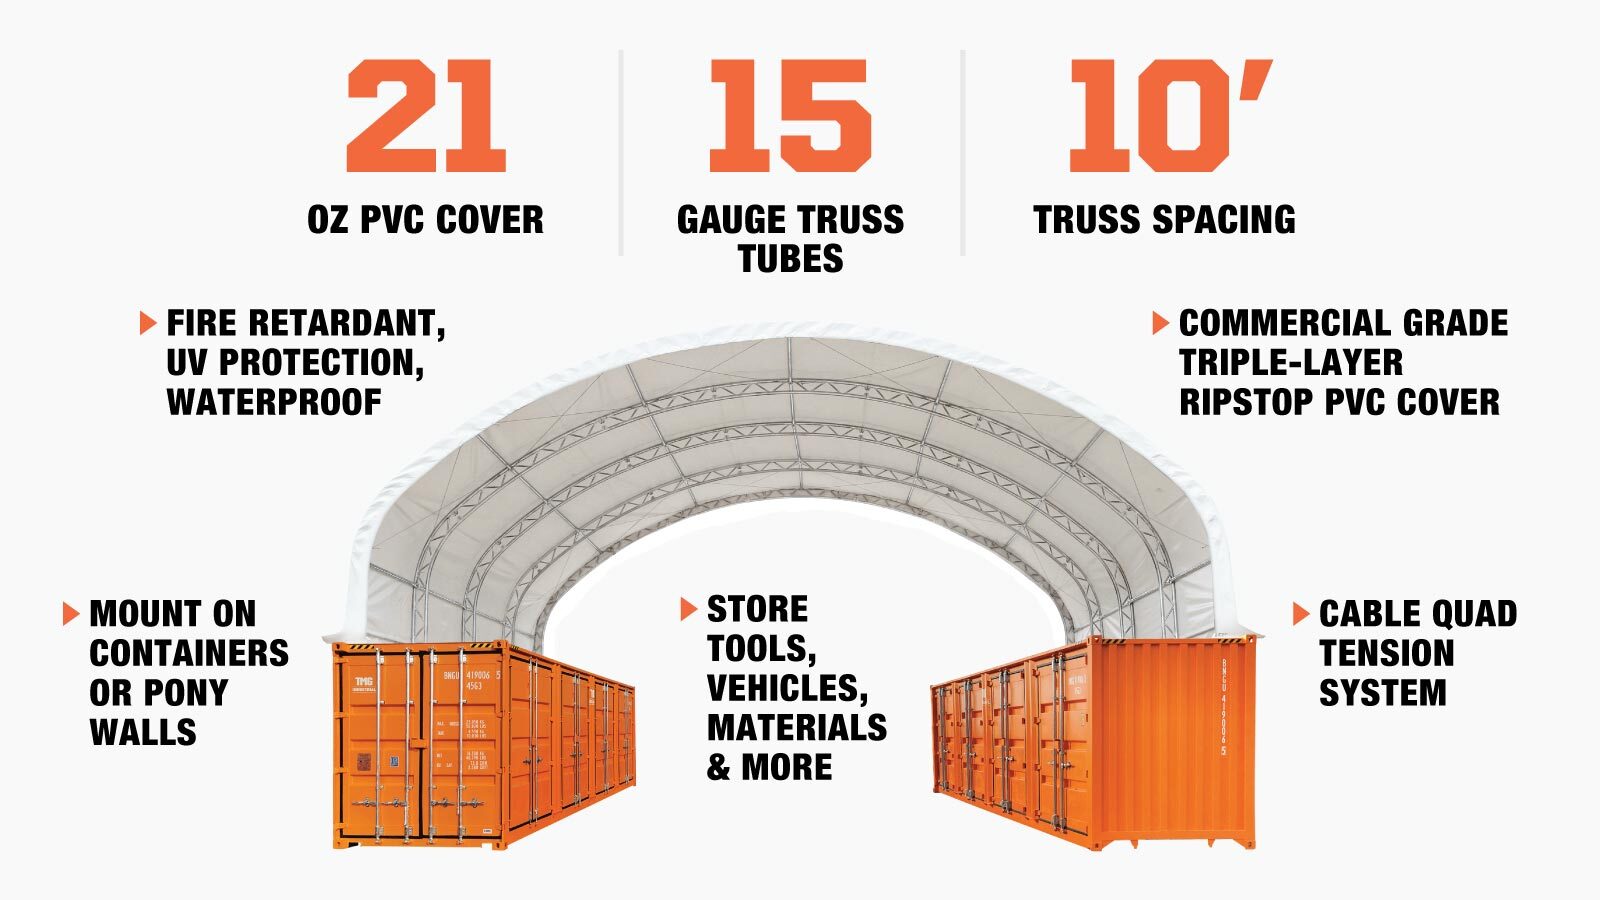 TMG Industrial 40' x 40' Dual Truss Container Shelter with Heavy Duty 21 oz PVC Cover, TMG-DT4041C (Previously DT4040C)-description-image